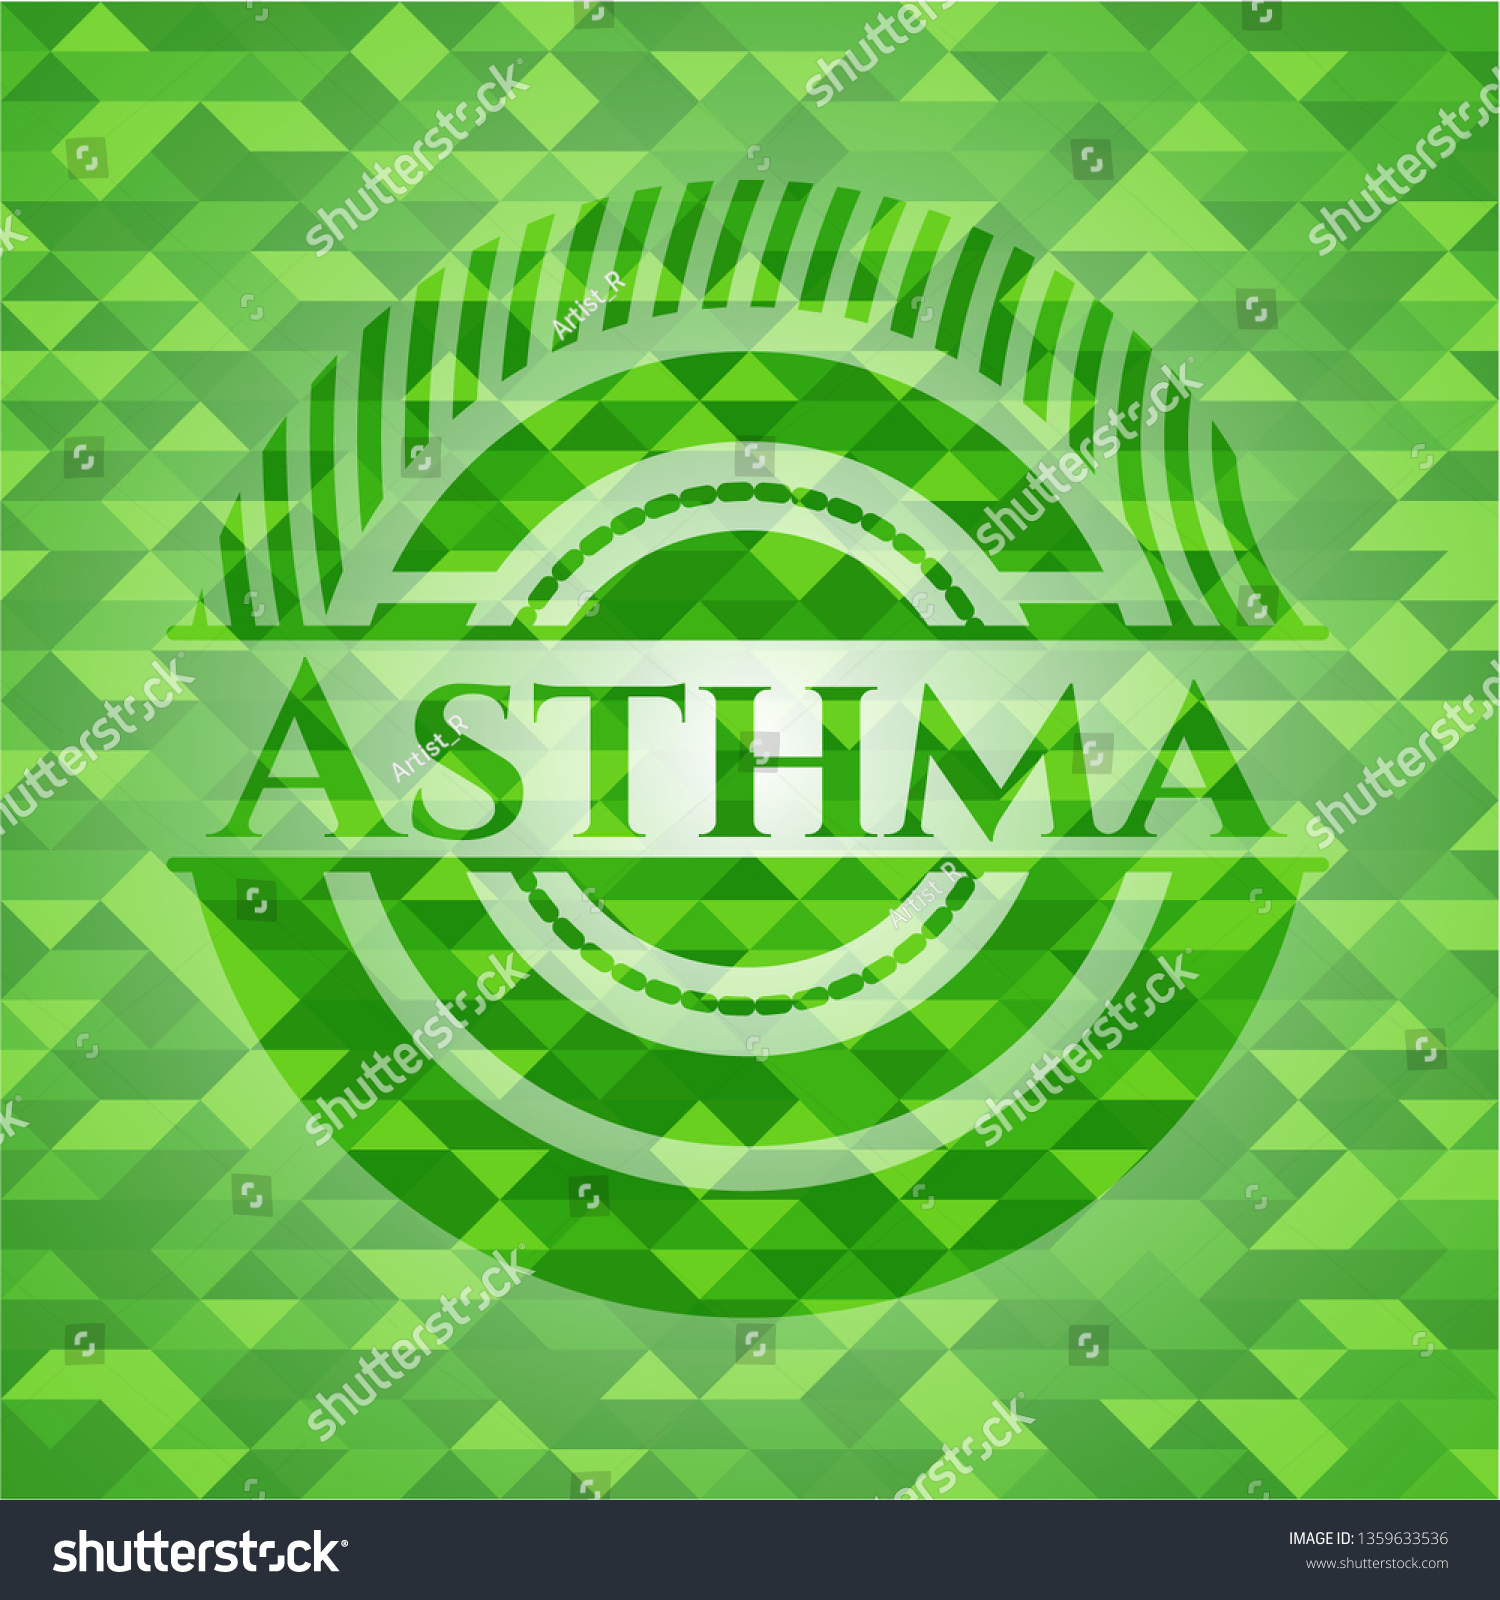 Asthma green emblem with mosaic background #1359633536